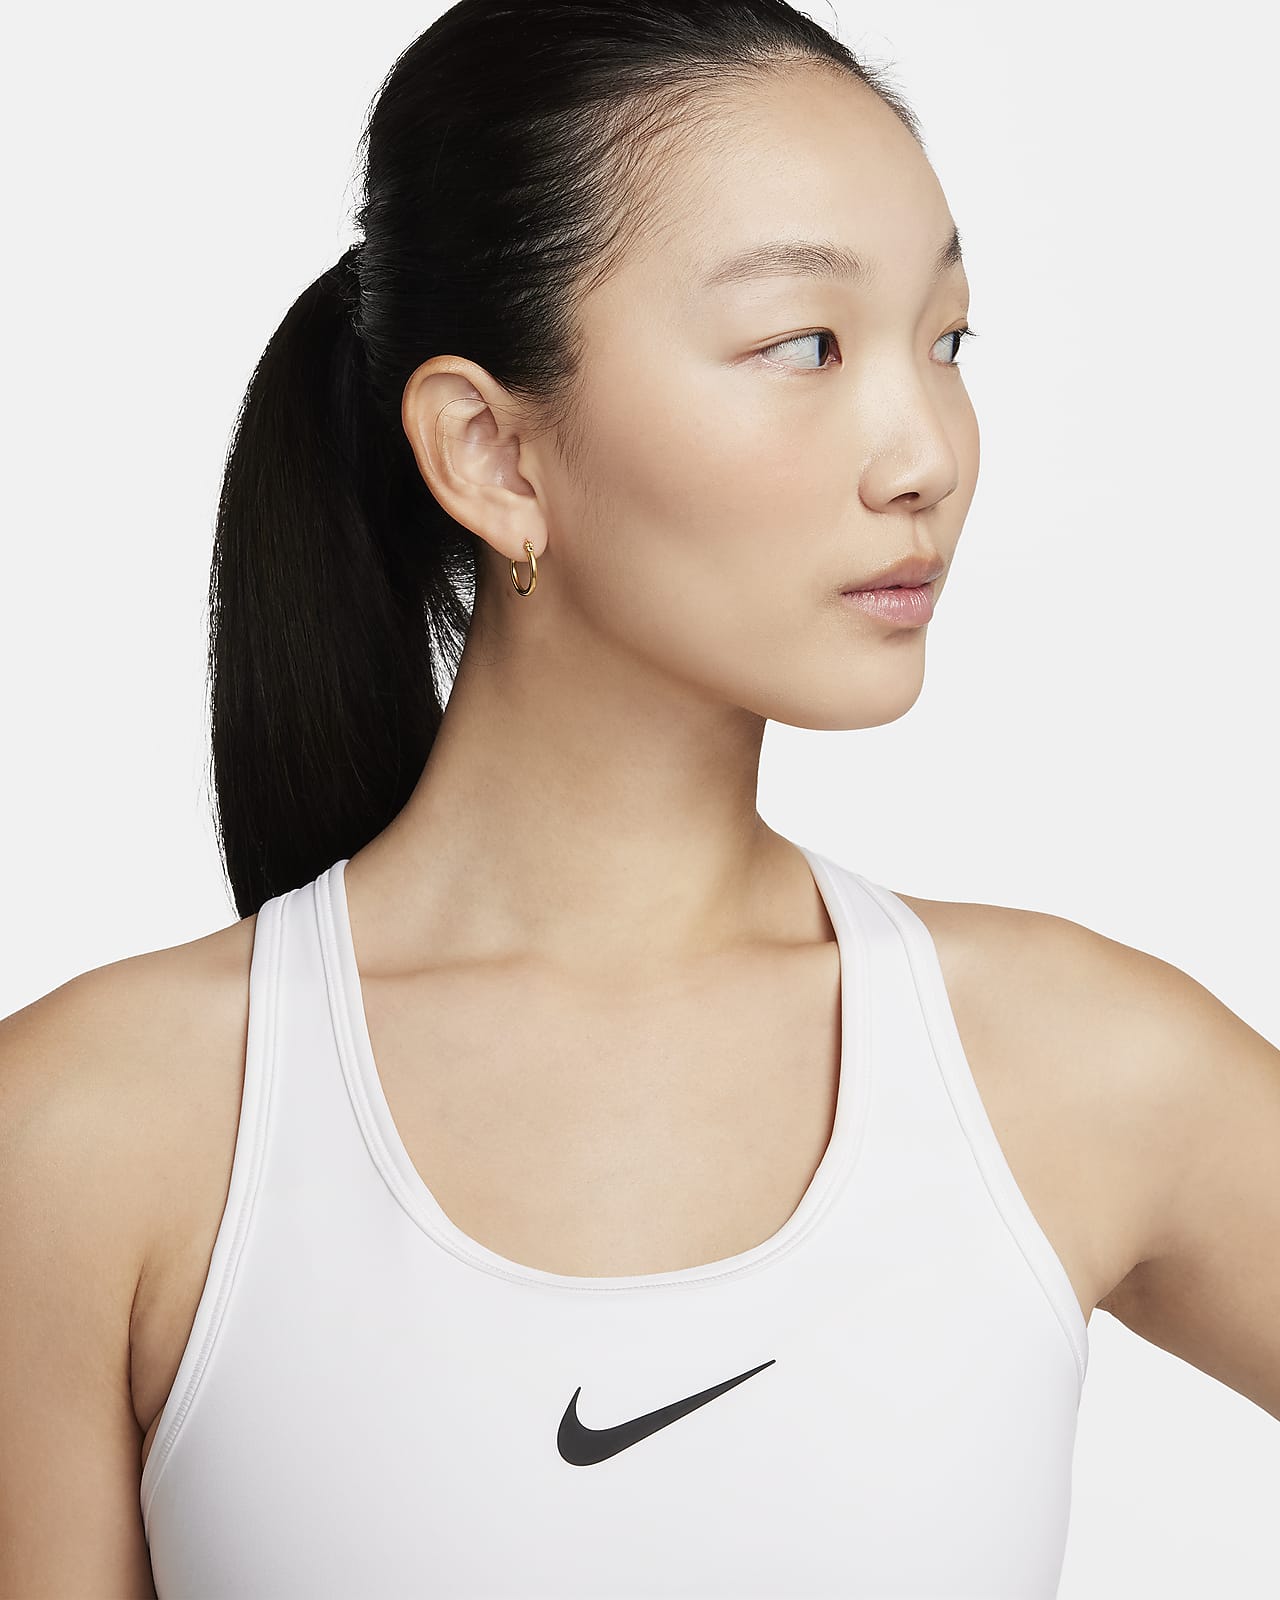 Volleyball Clothing. Nike JP